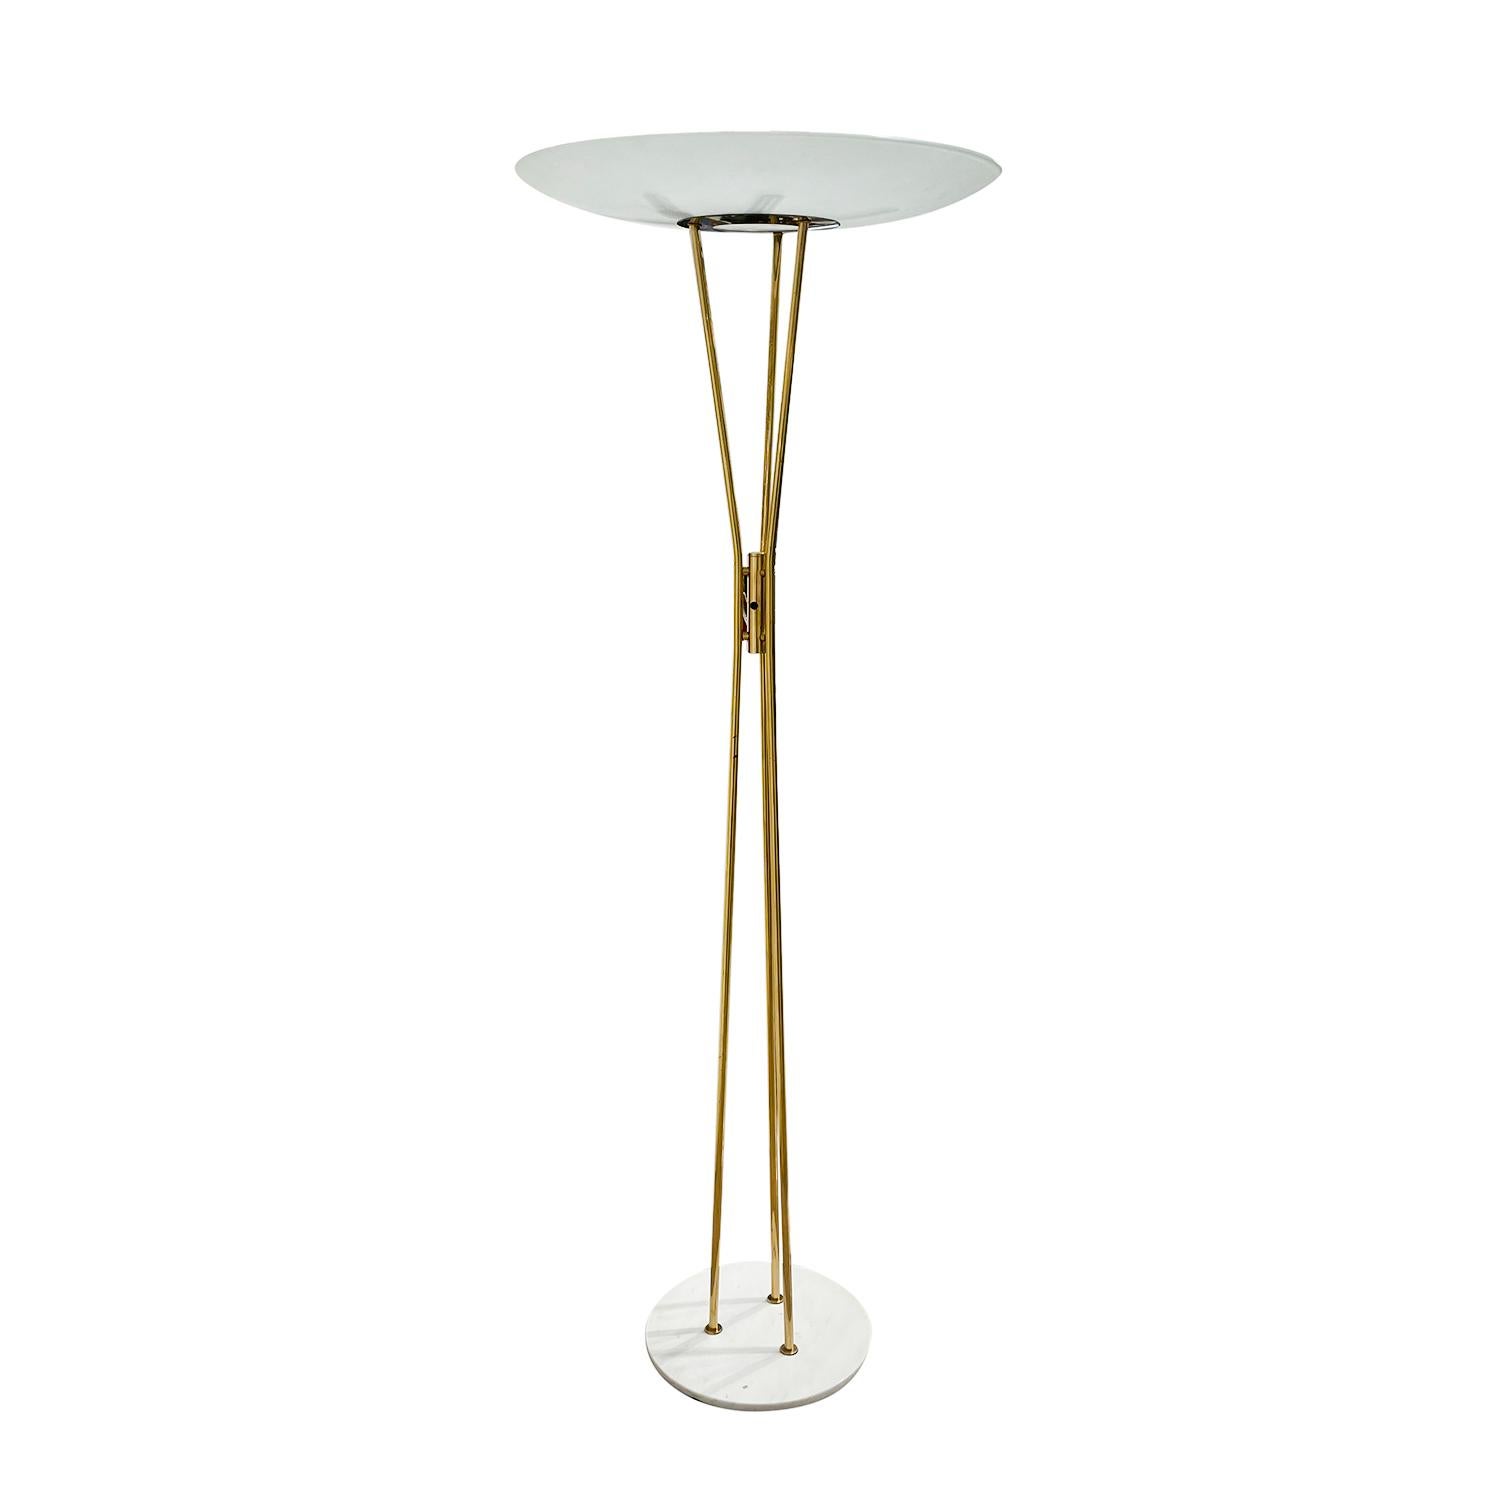 A vintage Mid-Century modern Italian floor lamp made of hand crafted polished brass designed by Gaetano Sciolari and produced by Stilnovo, in good condition. The sculptural light is composed with a large curved shade which is made of hand blown